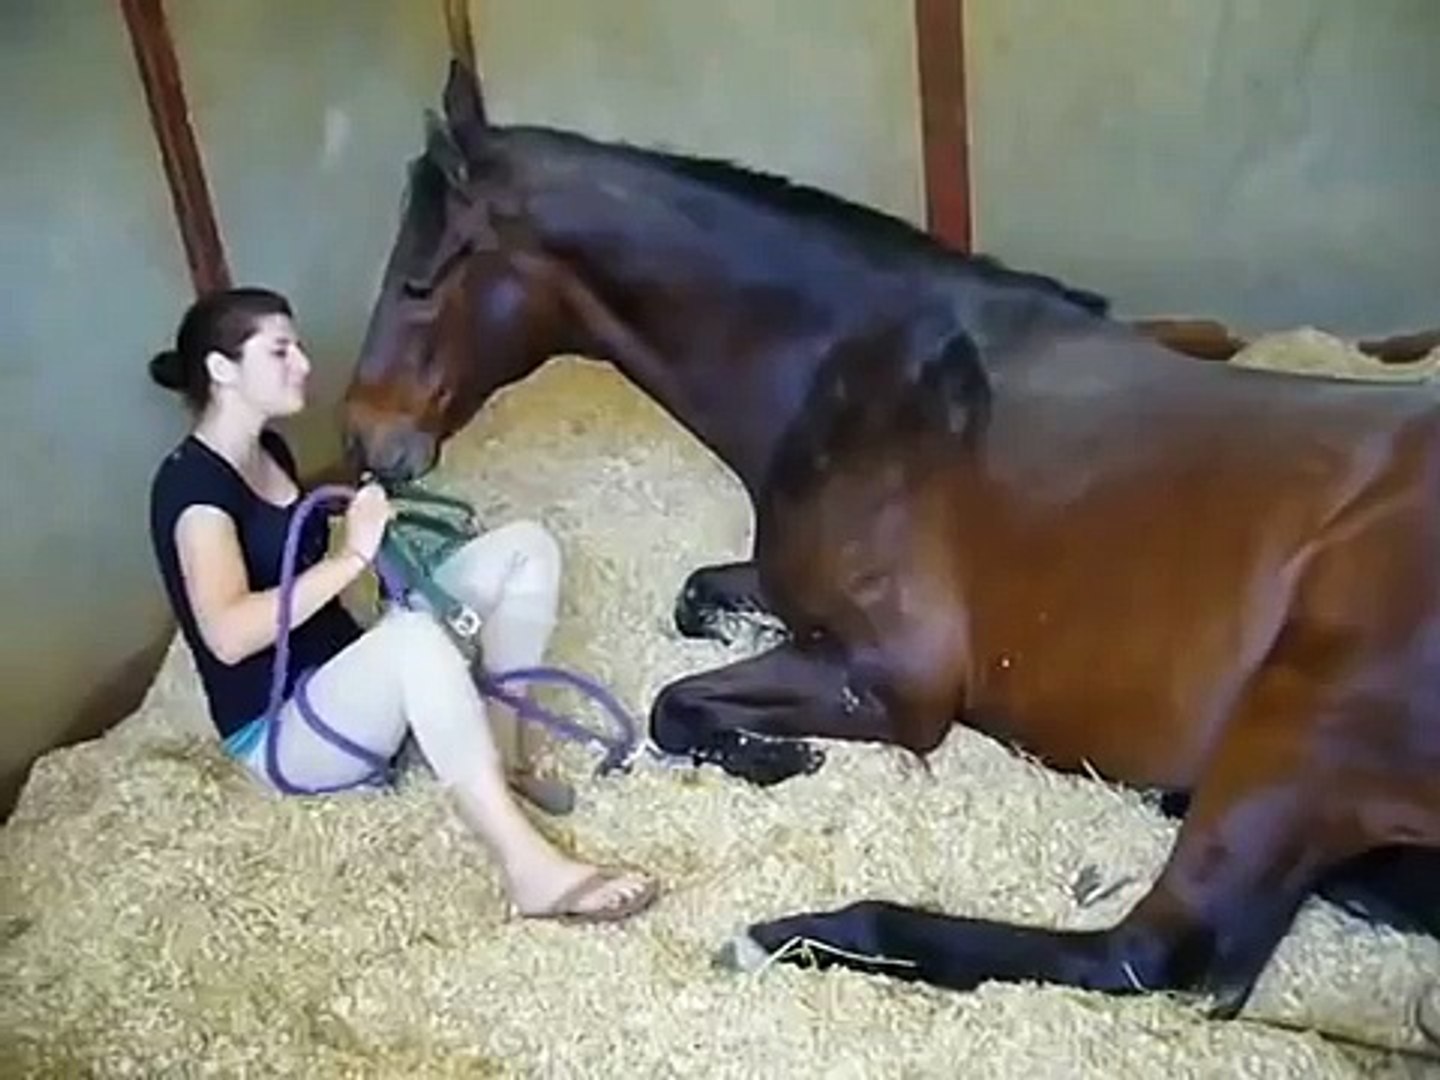 Horse and girl sexy video hd